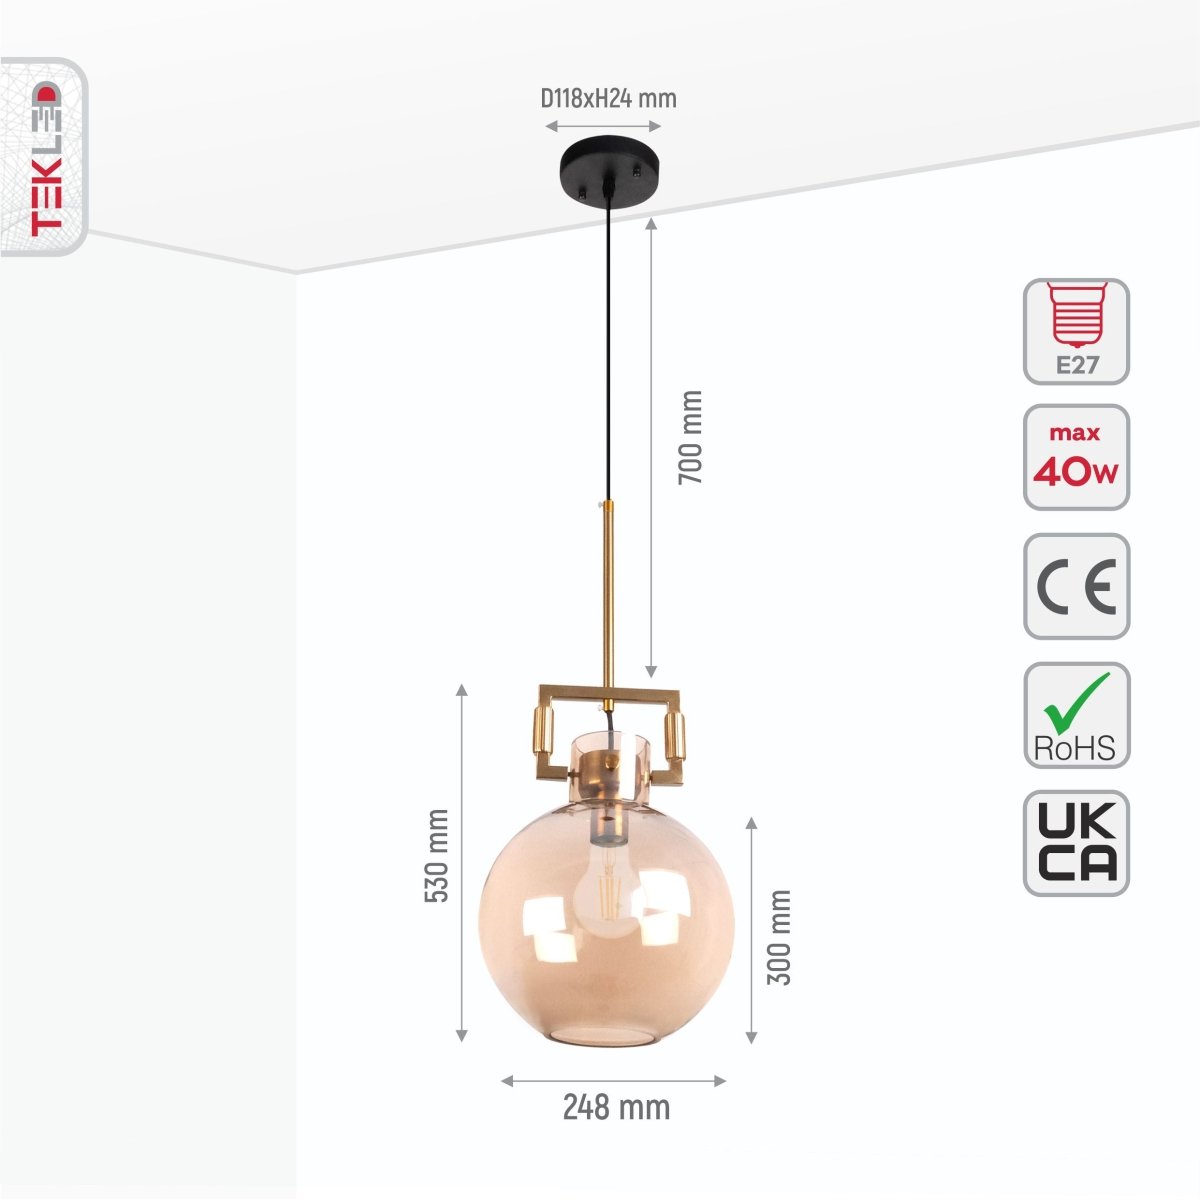 Size and specs of Amber Globe Gold Metal Modern Glass Ceiling Pendant Light with E27 Fitting | TEKLED 156-19472